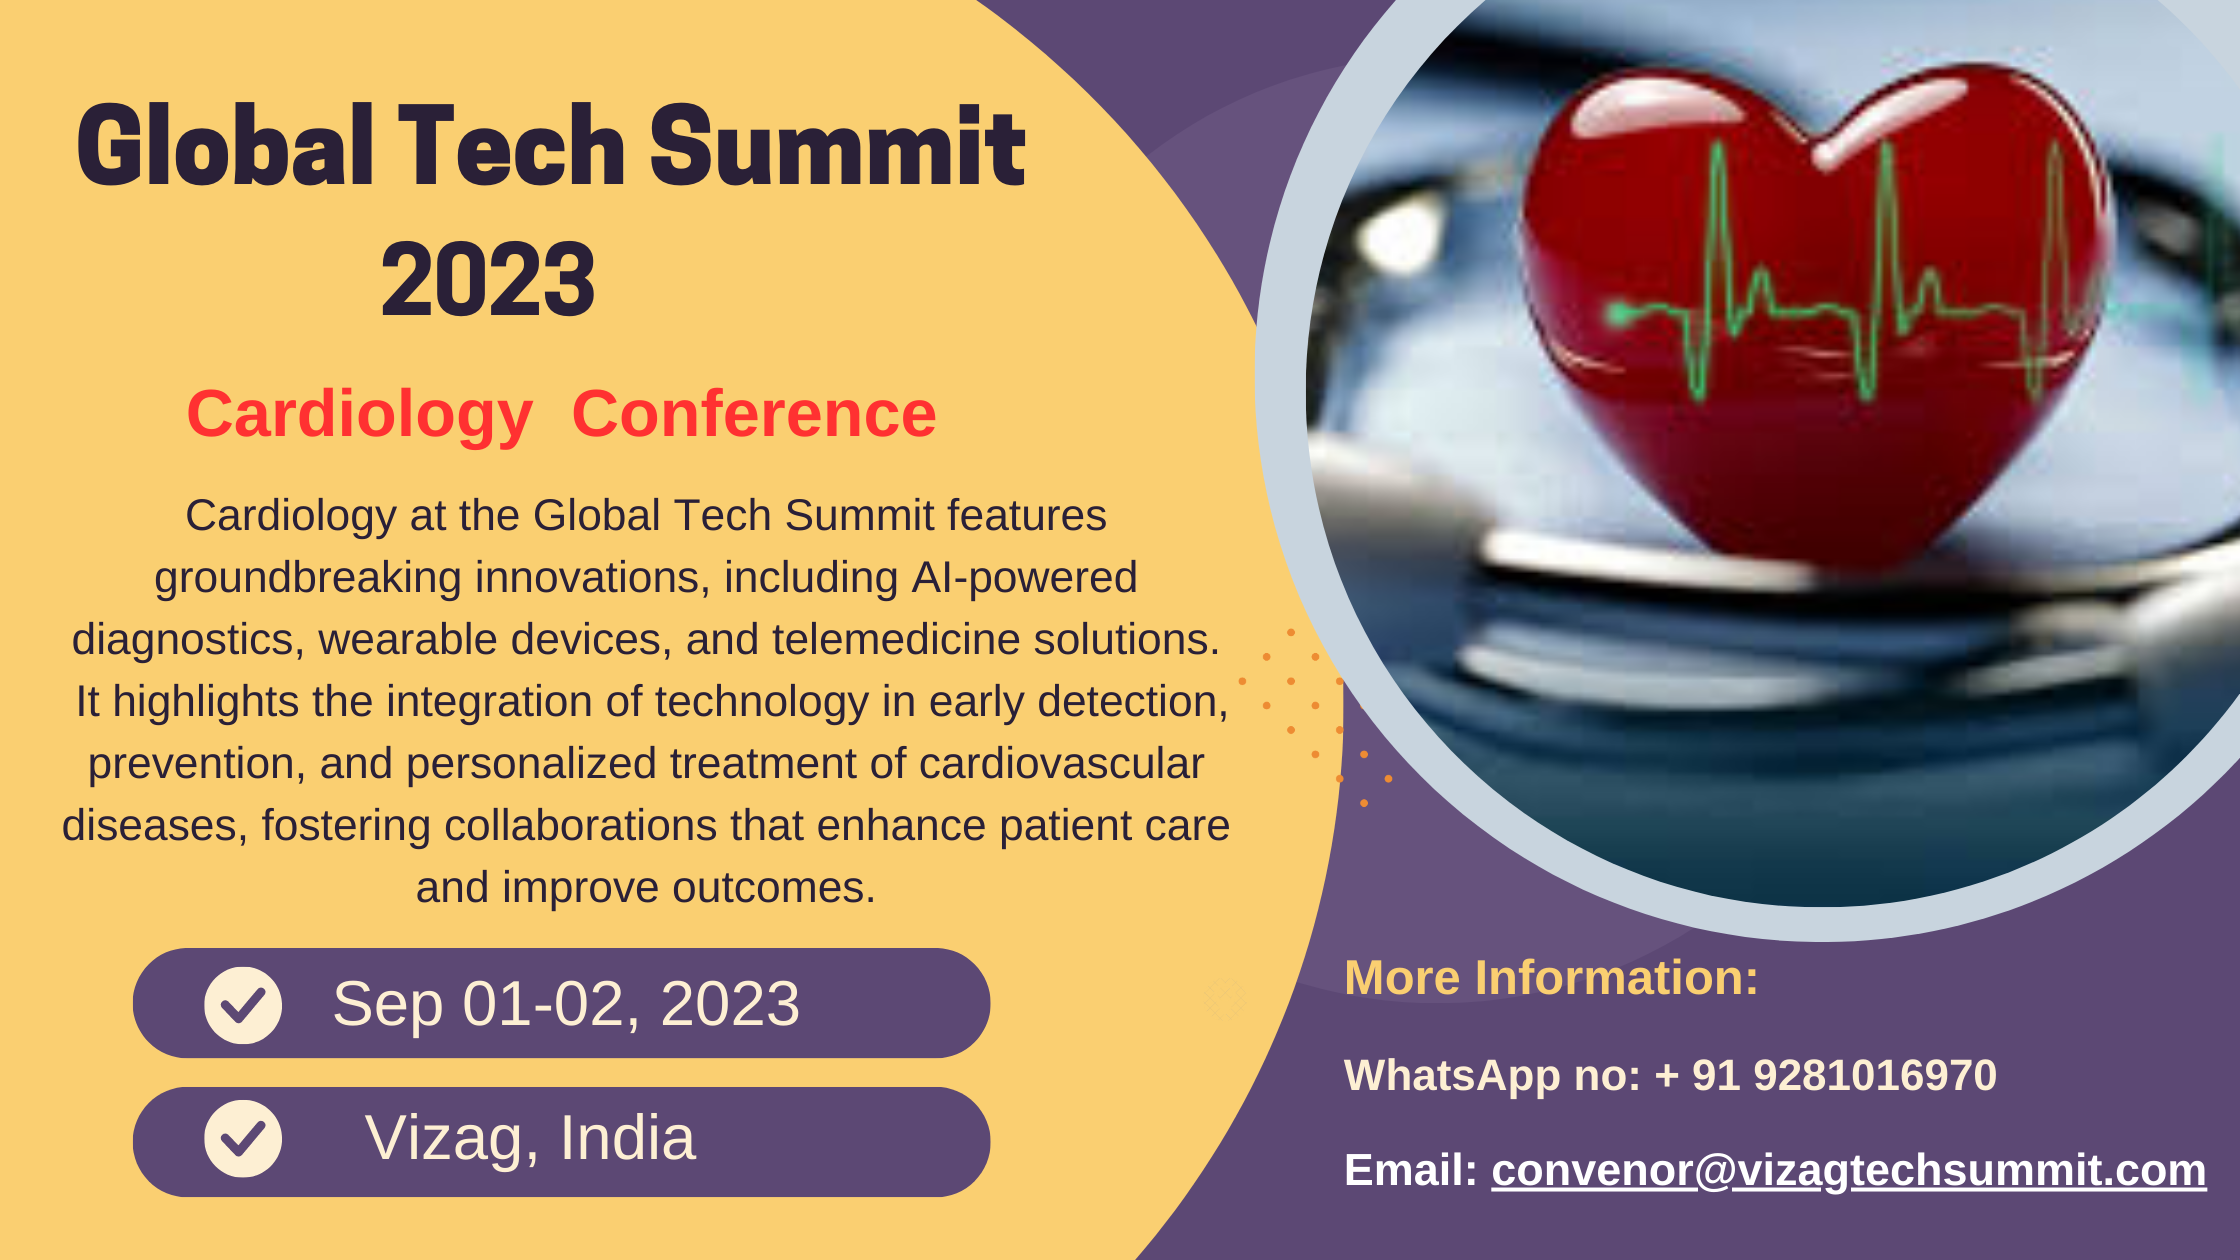 Advancements in Cardiology: Highlights from the Global Tech Summit